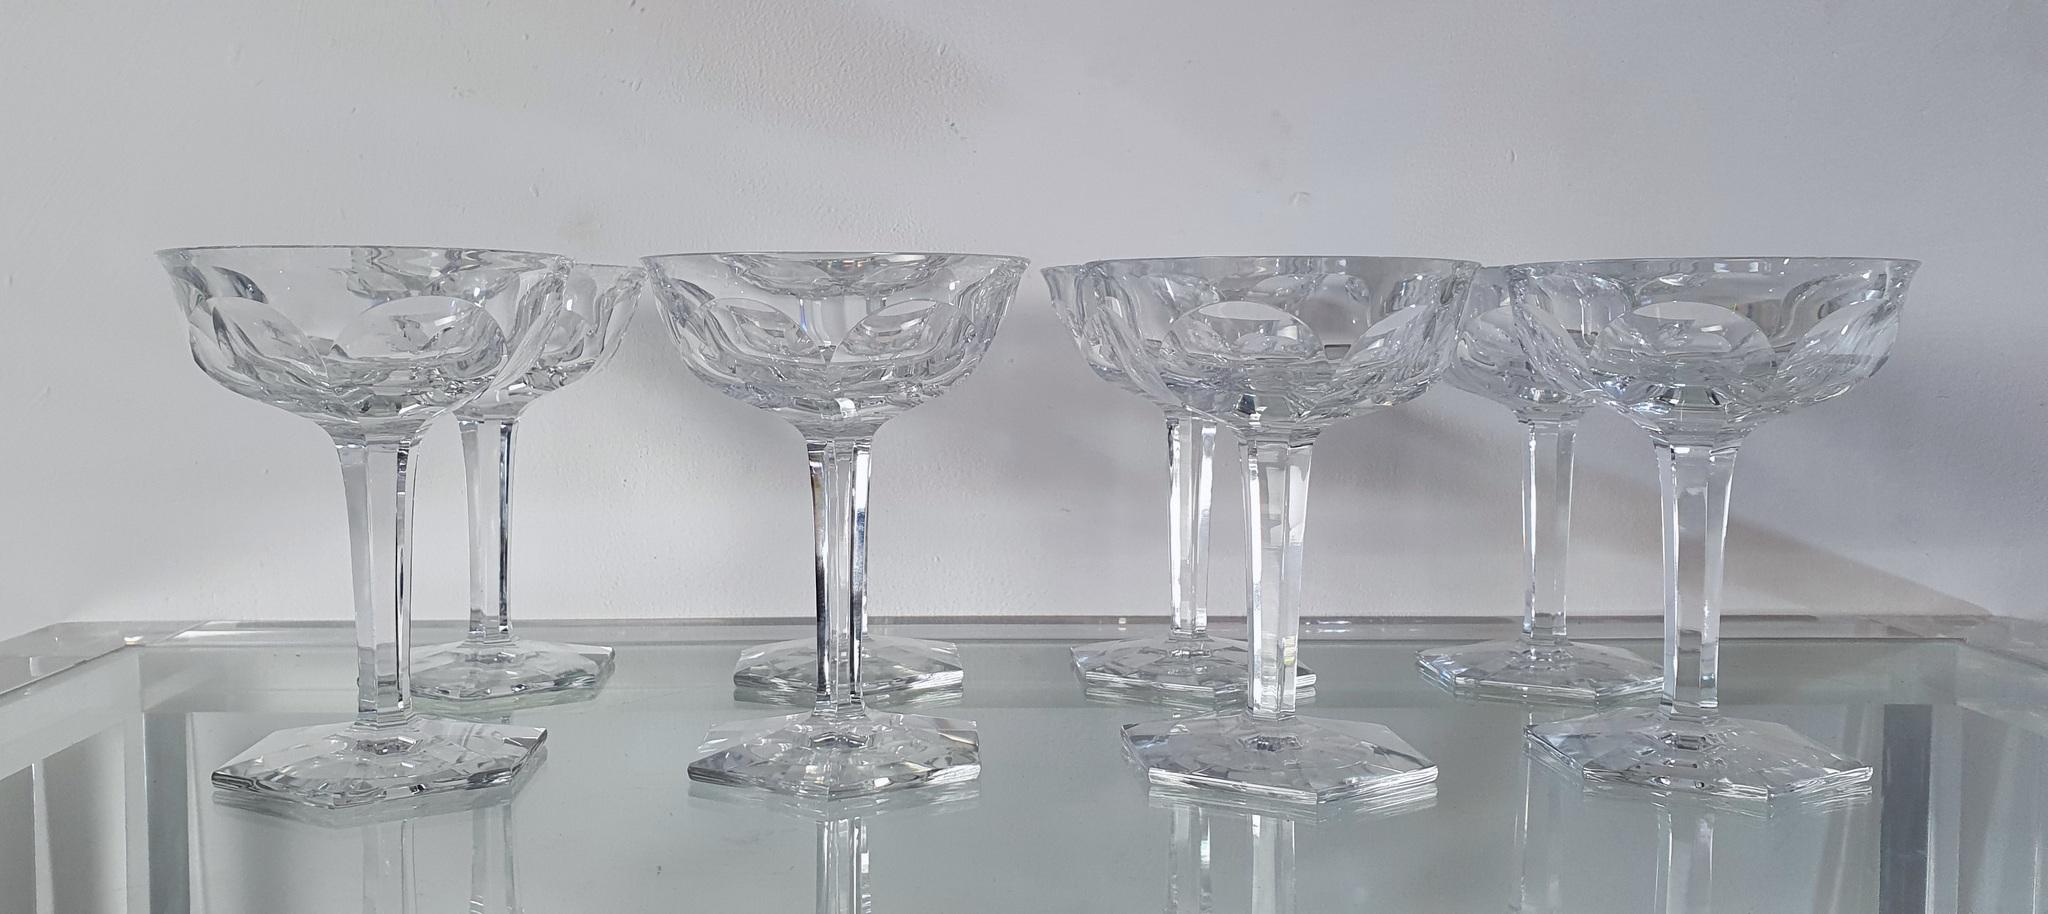 Baccarat Crystal Champagne Coupe Glasses Set of 8 In Excellent Condition For Sale In Albano Laziale, Rome/Lazio